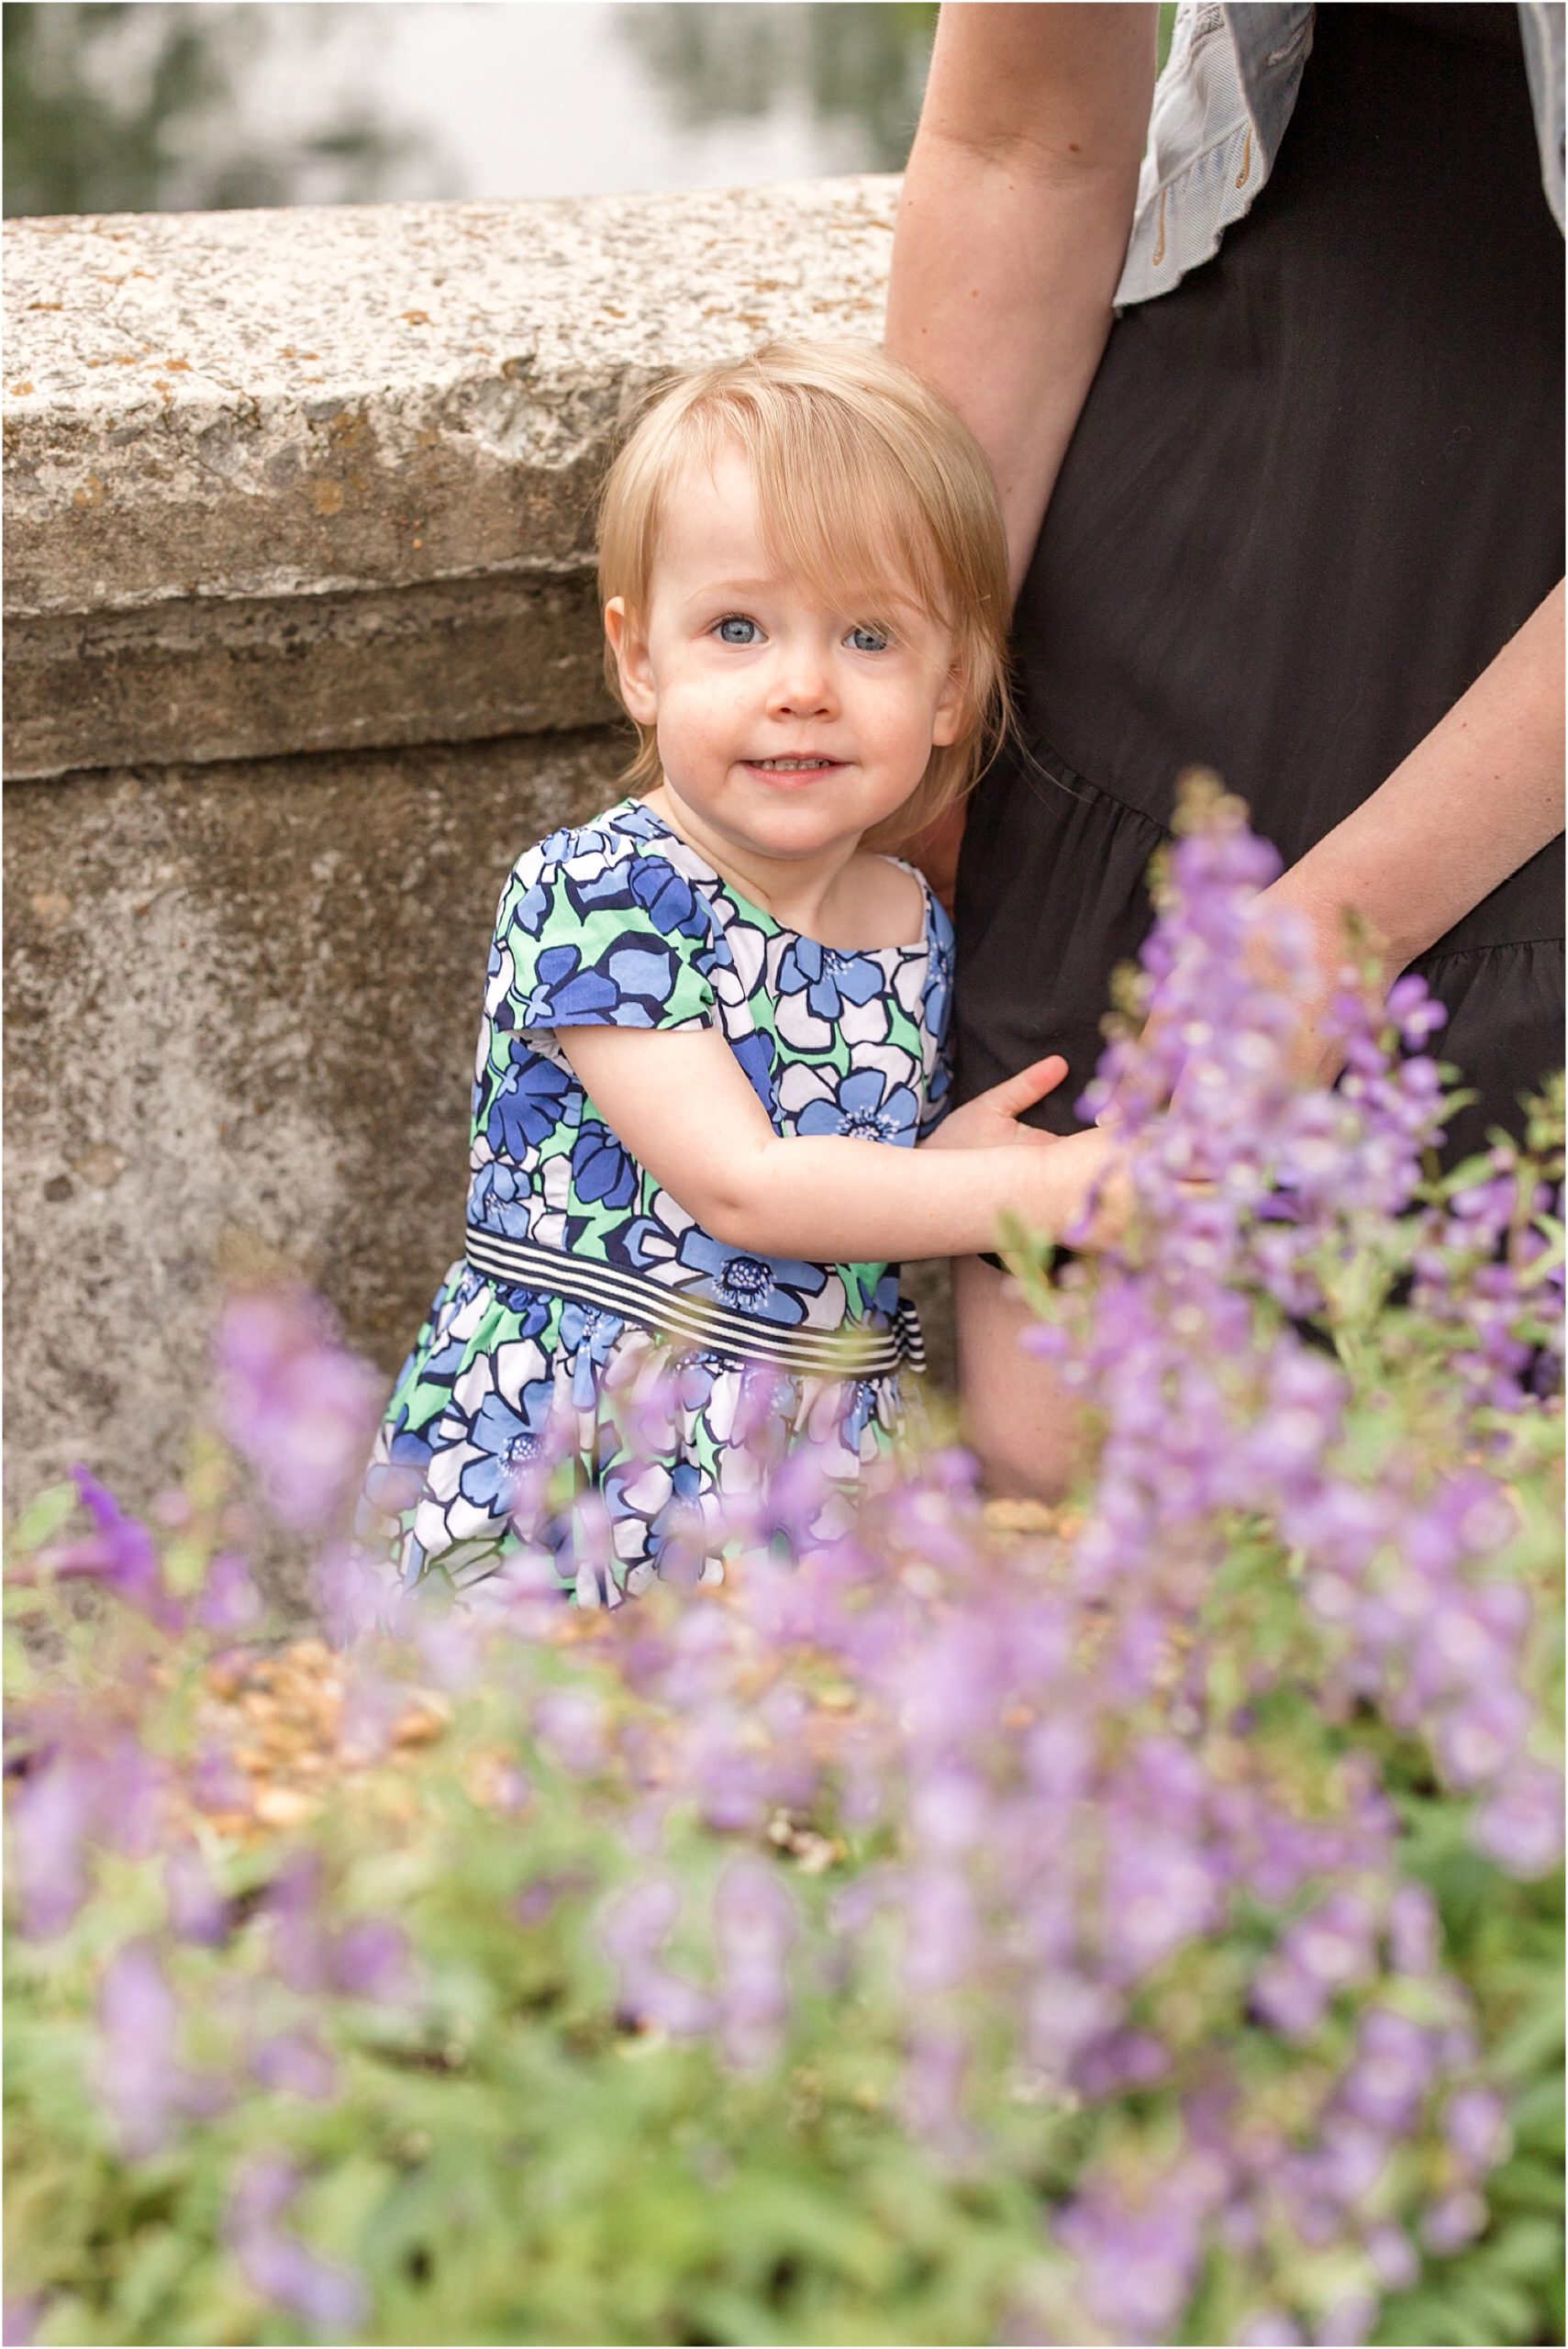 The little girl is standing in front of a stone wall, behind a flowering bush. She is wearing a white, blue, and green floral print dress.